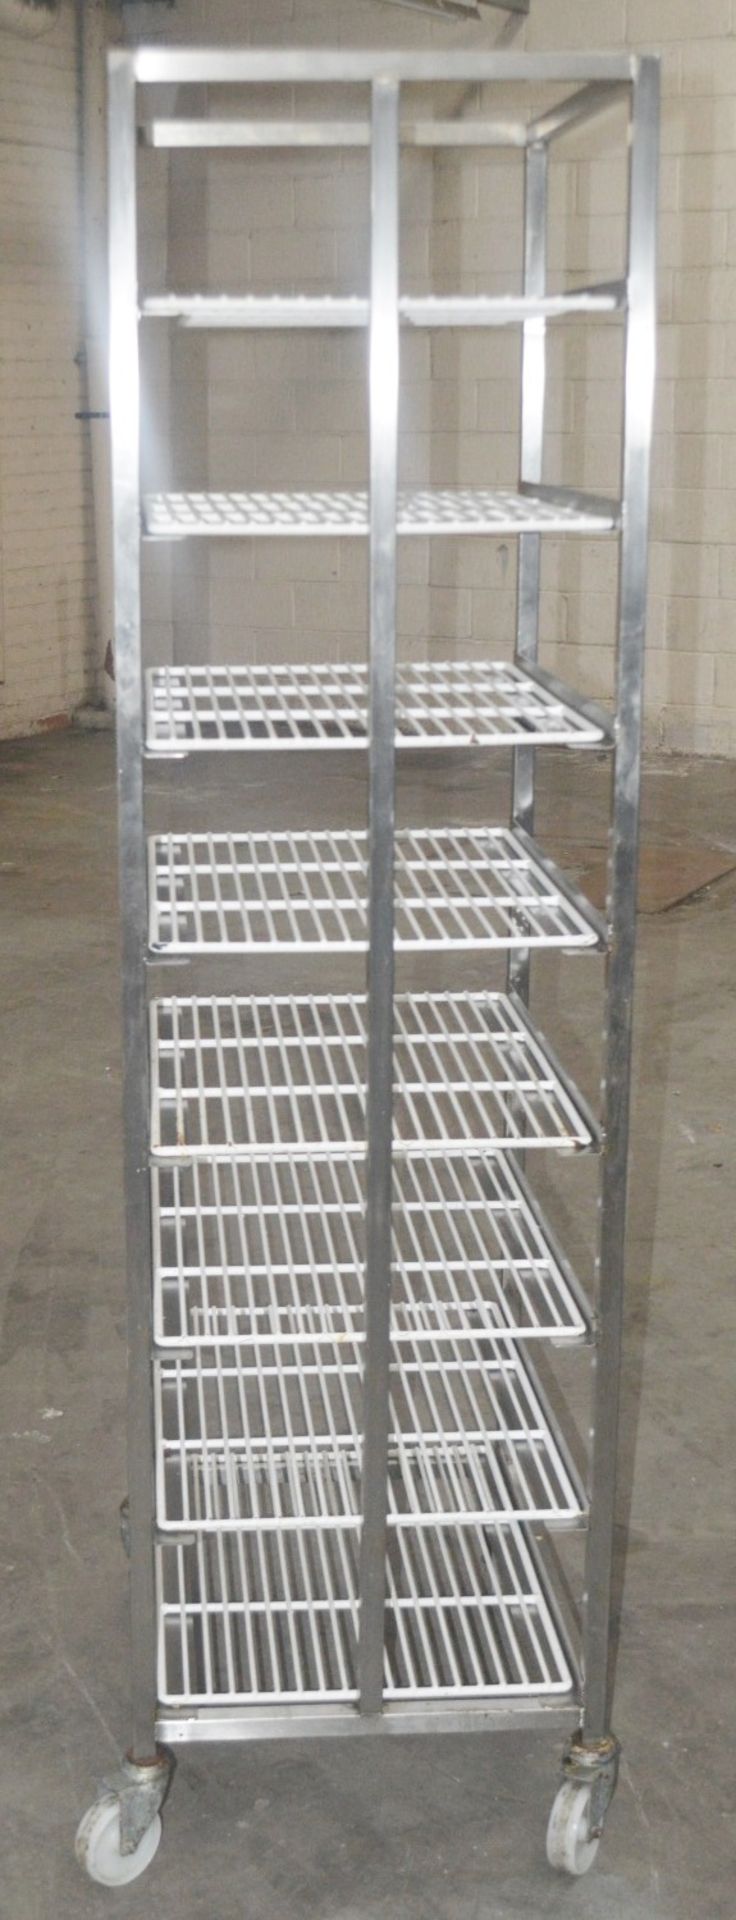 1 x Stainless Steel Commercial Kitchen 8-Tier Wire Shelving Rack, On Castors - Dimensions: H190 x - Image 3 of 3